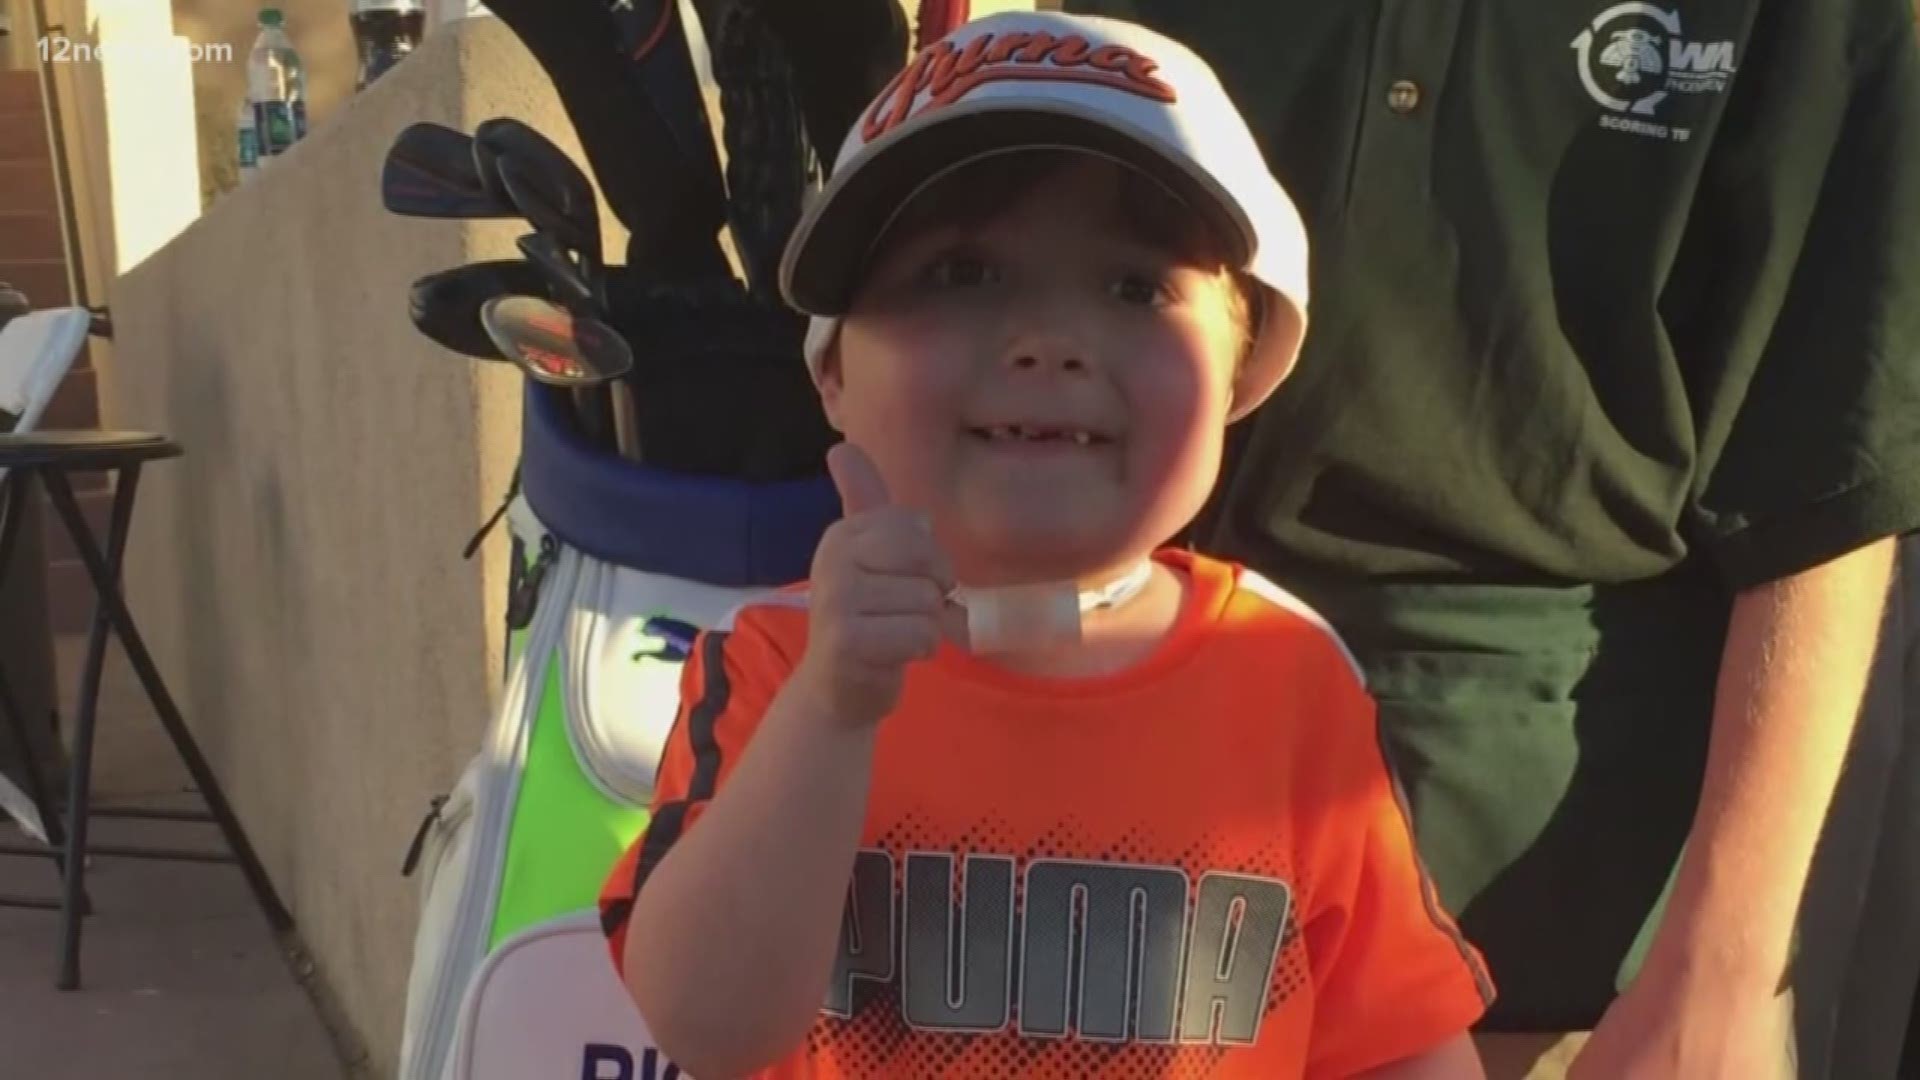 7-year-old golf superfan Griffin, who passed away just before the Phoenix Open in 2018, had a tremendous impact on the golf community, especially Rickie Fowler.